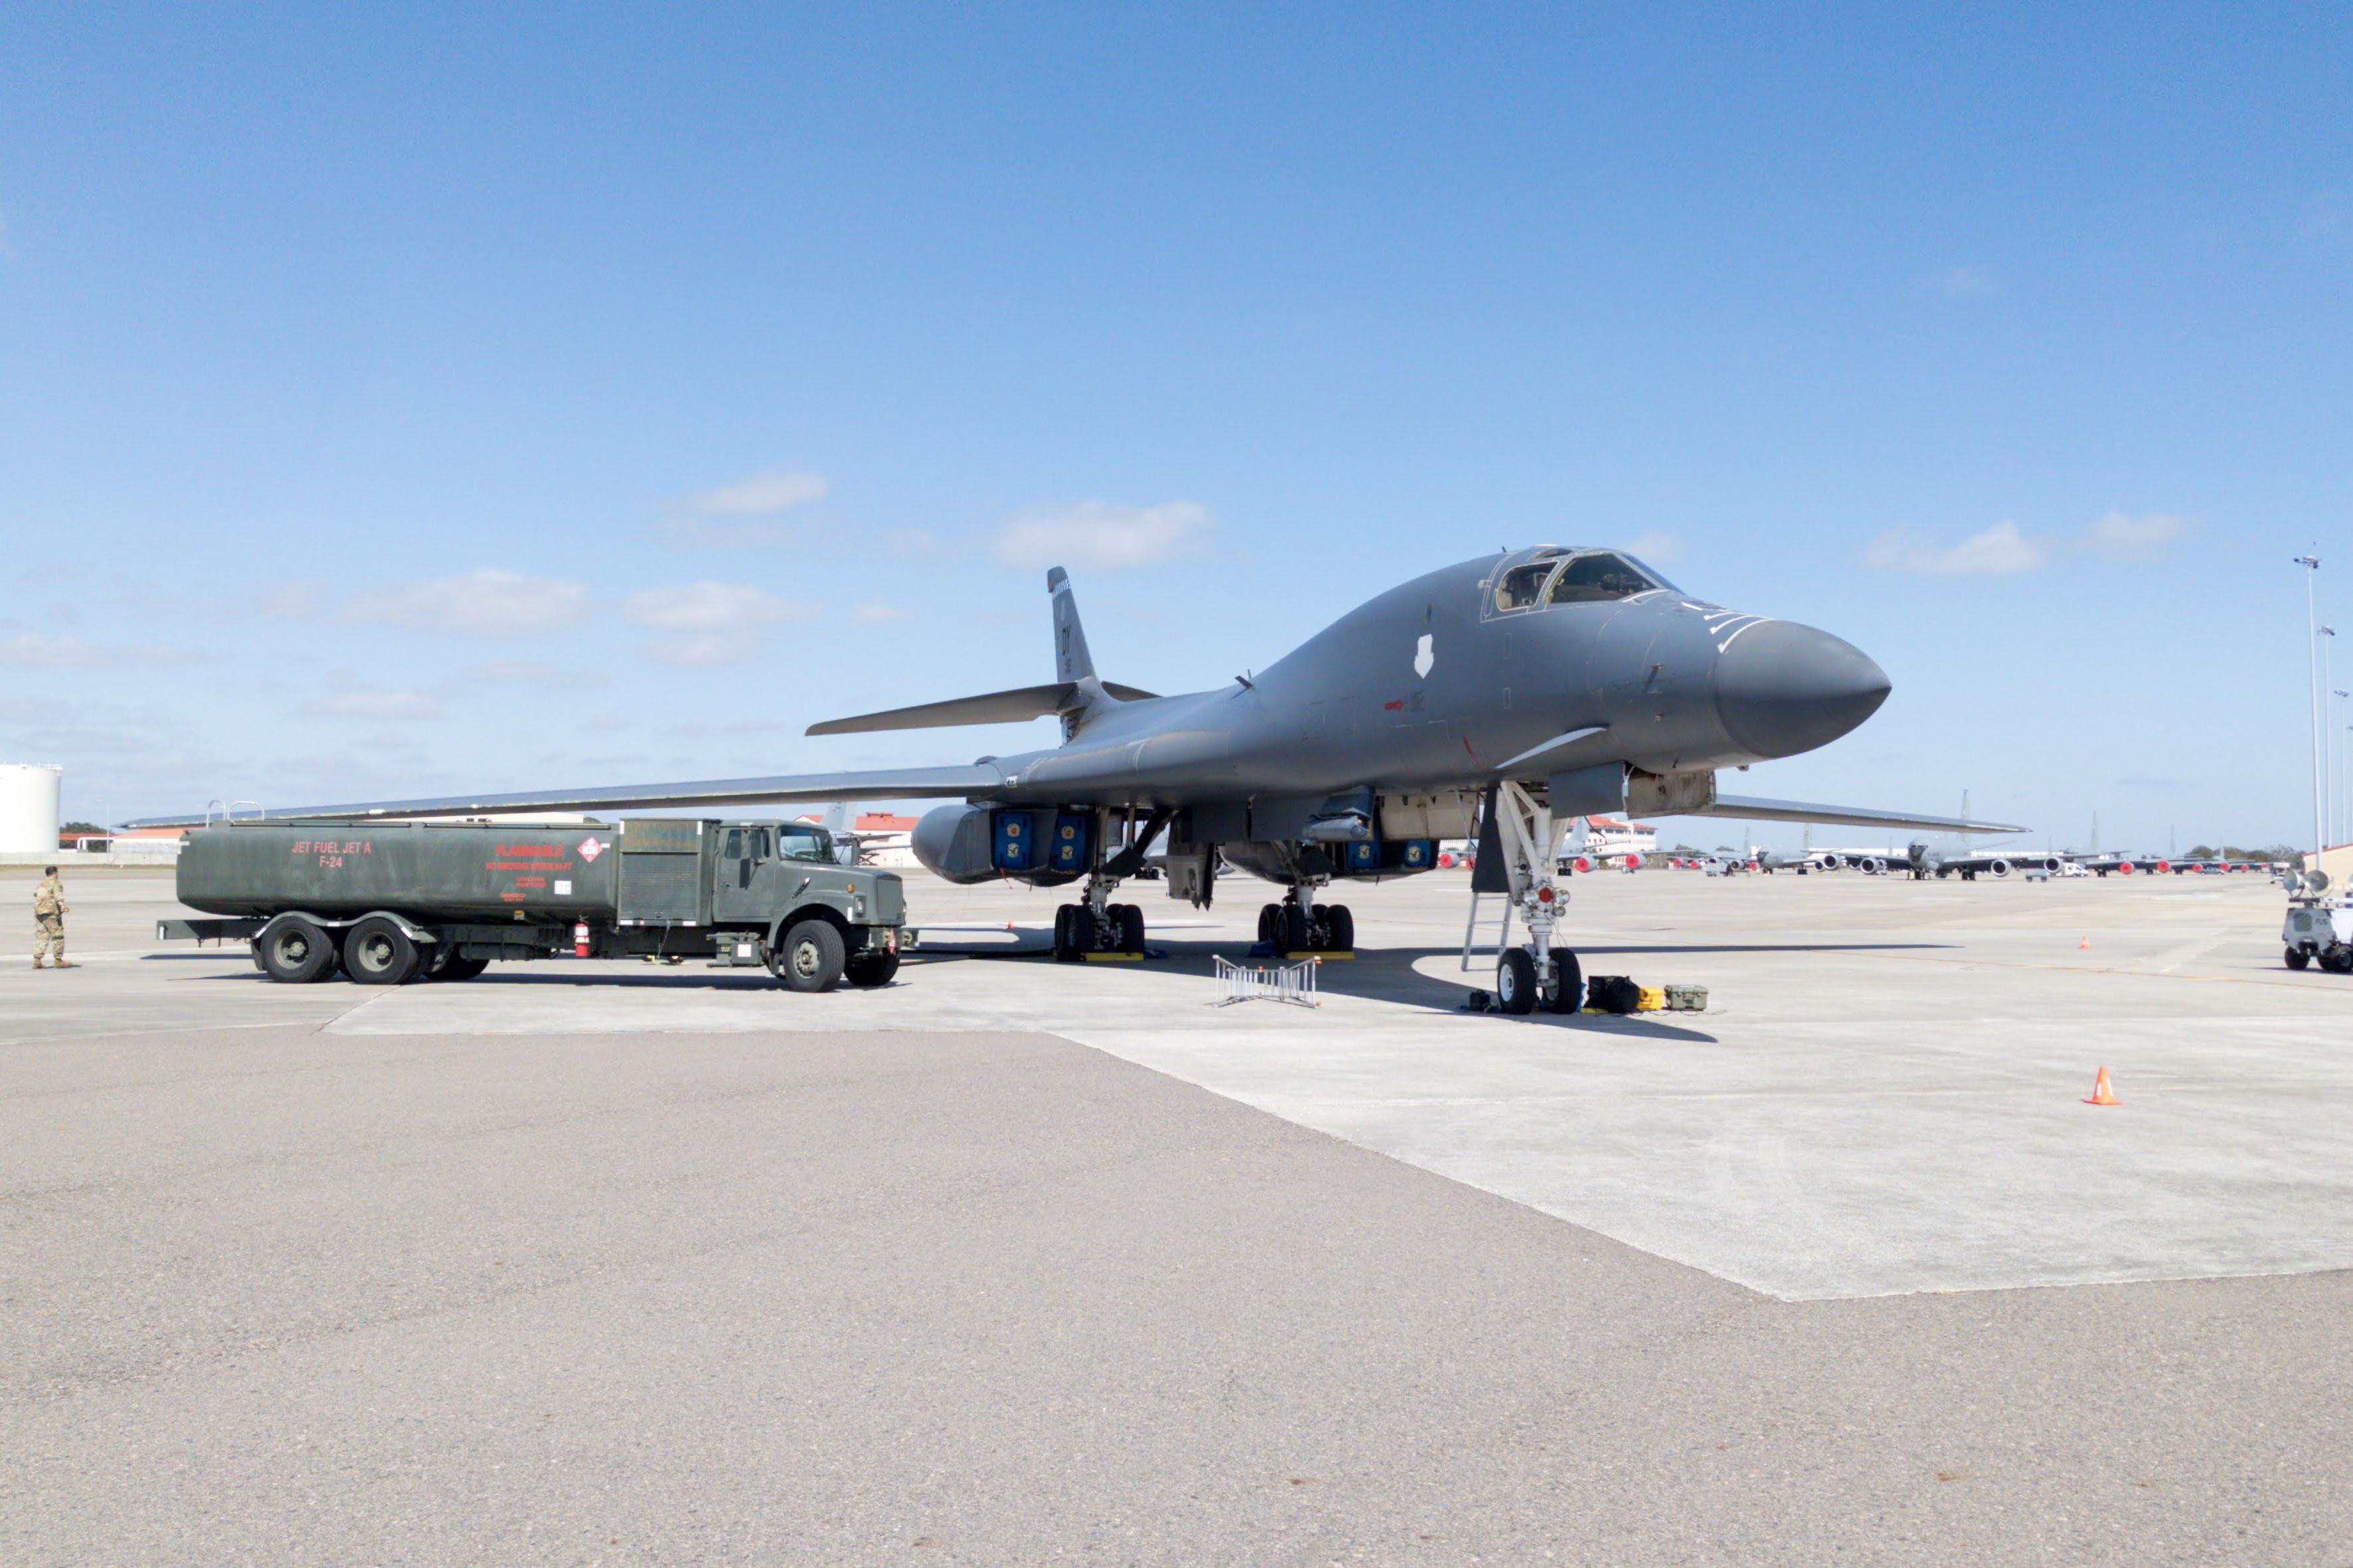 A B-1B Lancer aircraft assigned to Dyess Air Force Base, Texas is parked and unloading fuel into an R-11 fuel truck on the flight line at MacDill Air Force Base, Fla, Feb. 2, 2021.